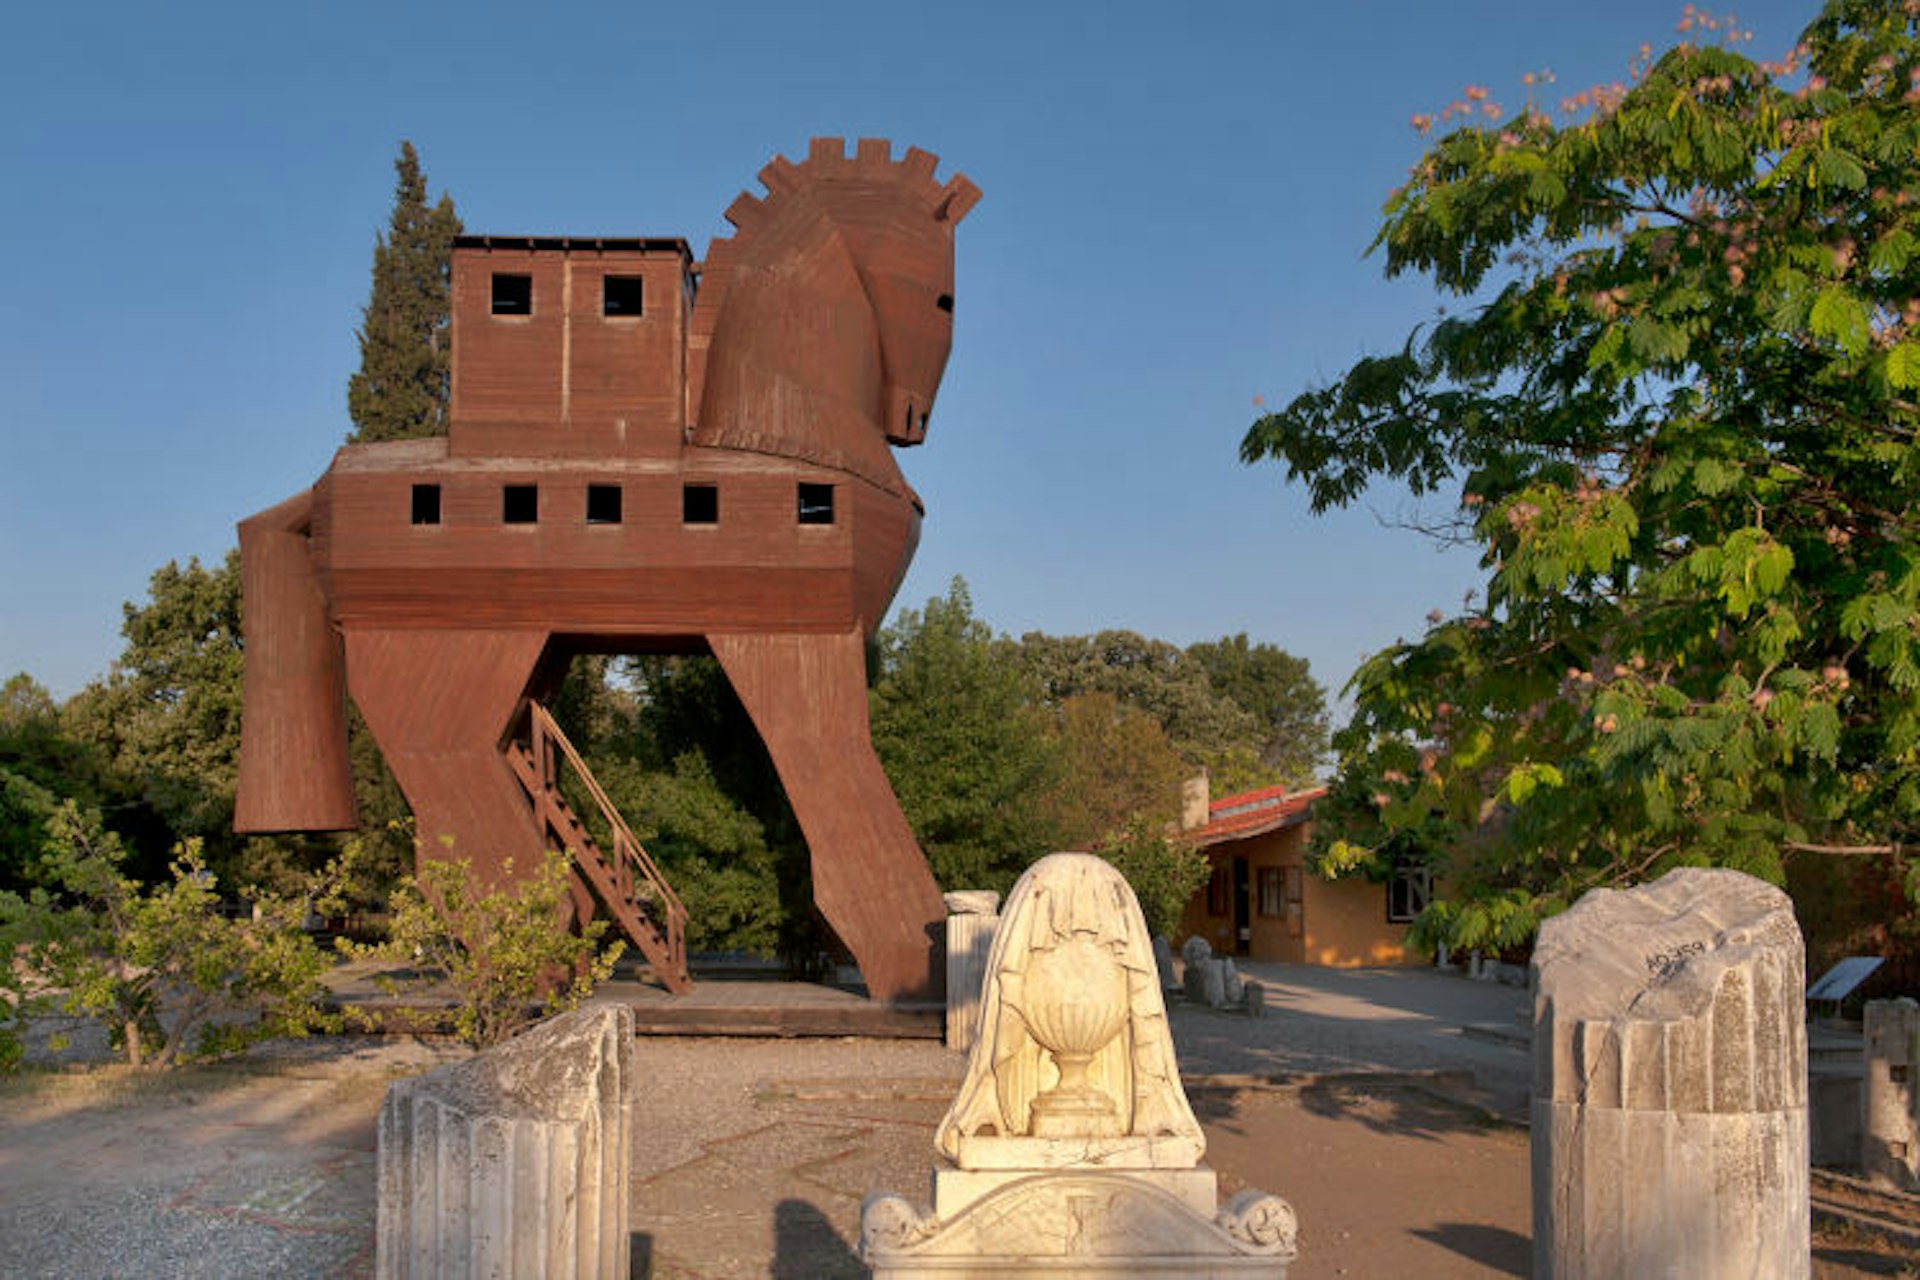 A reproduction of the Trojan Horse at is currently visible at the real Troy site in Turkey